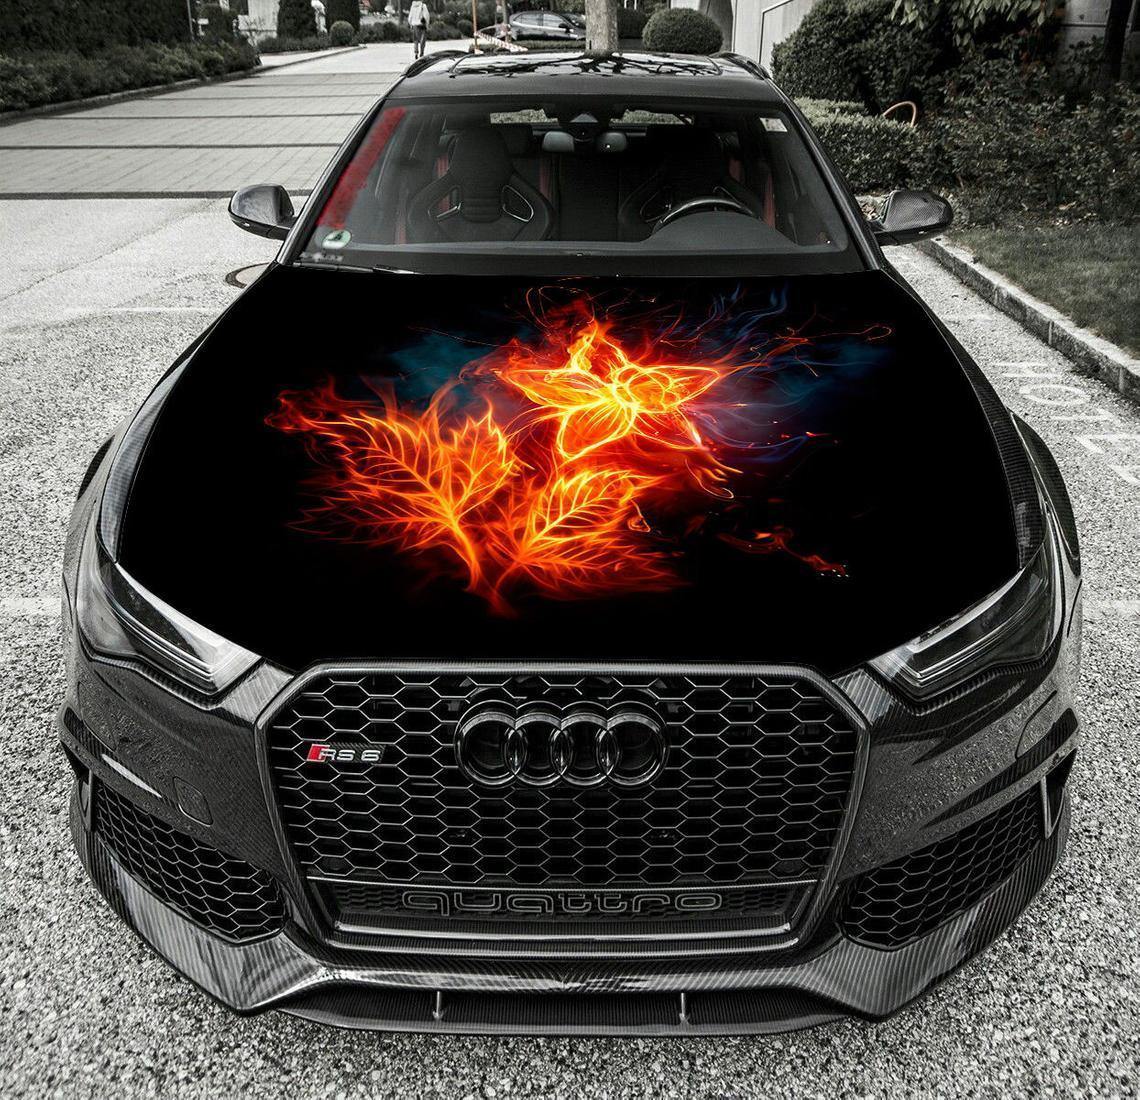 Vinyl Car Hood Wrap Full Color Graphics Decal Fire Flower Blooms Sticker fit any Auto